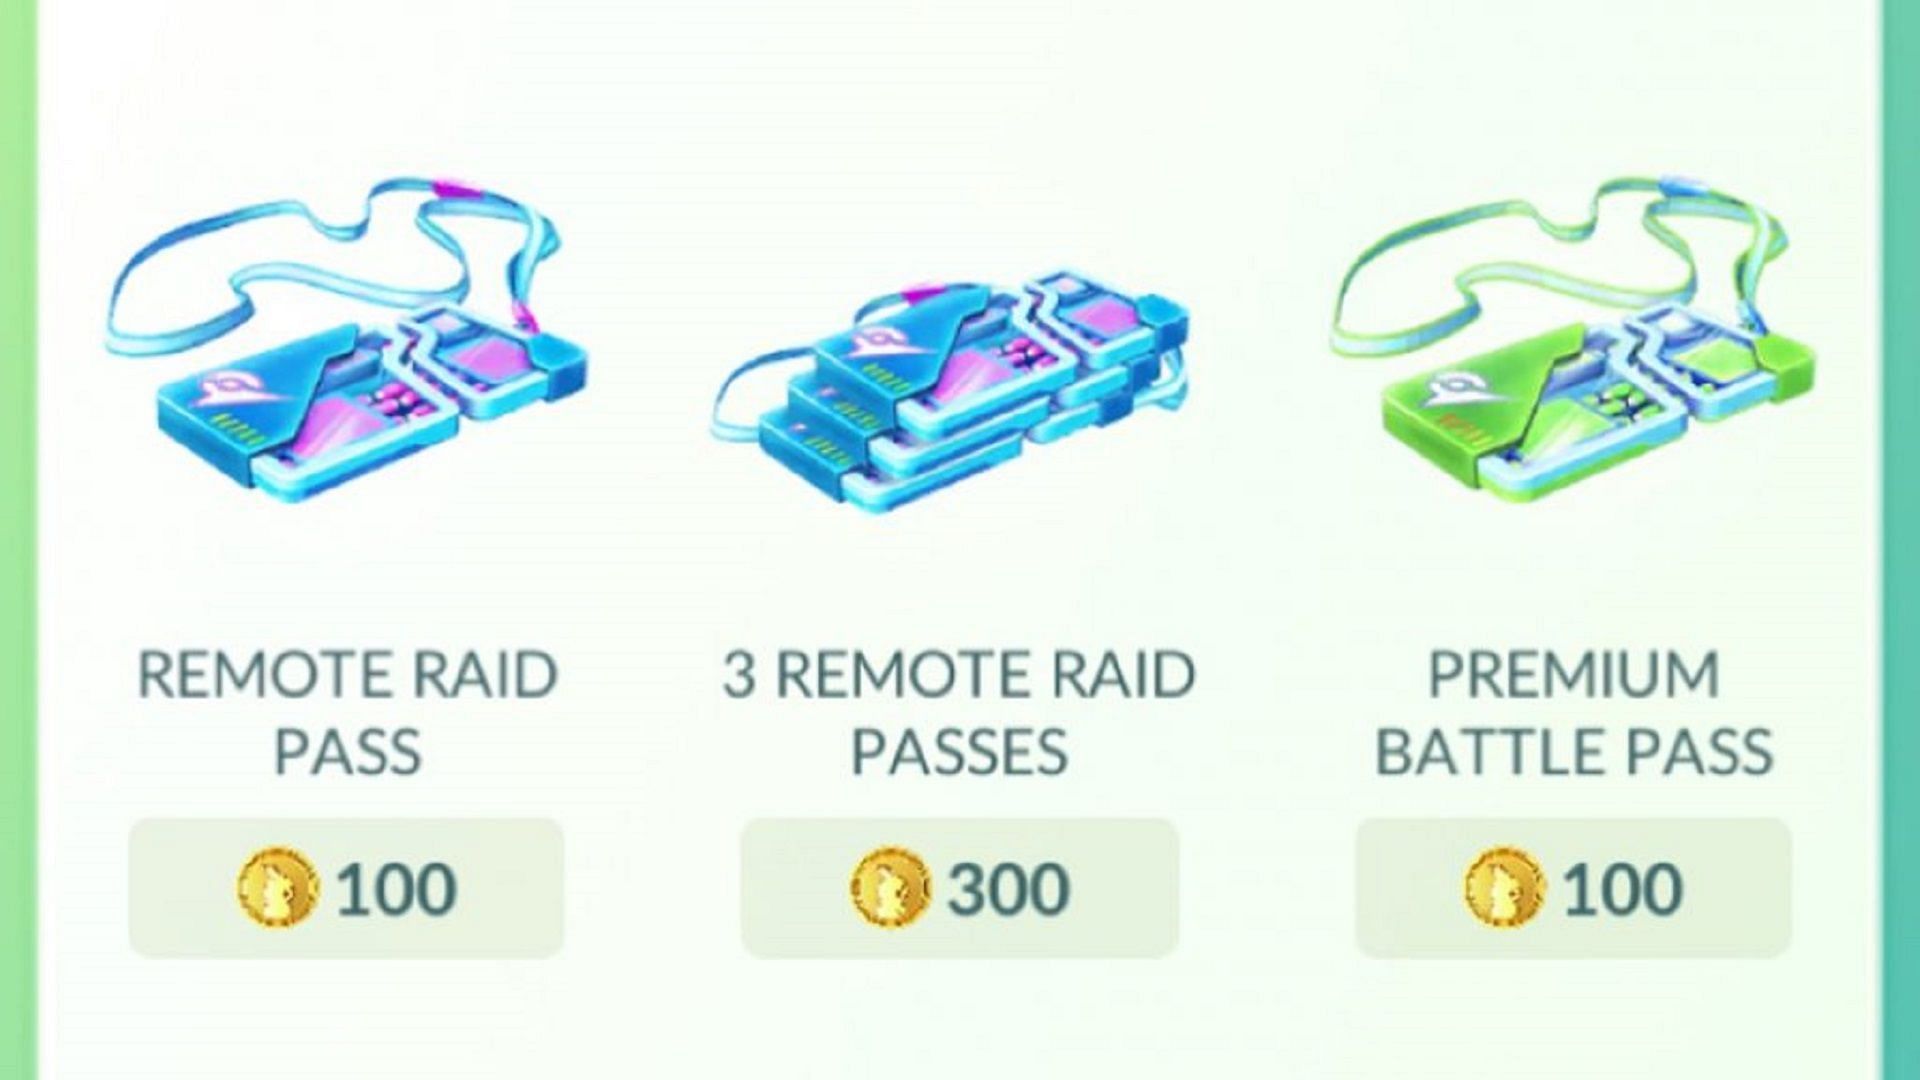 Pokemon GO trainers will need to look to the in-game shop to get Remote Raid Passes now (Image via Niantic)